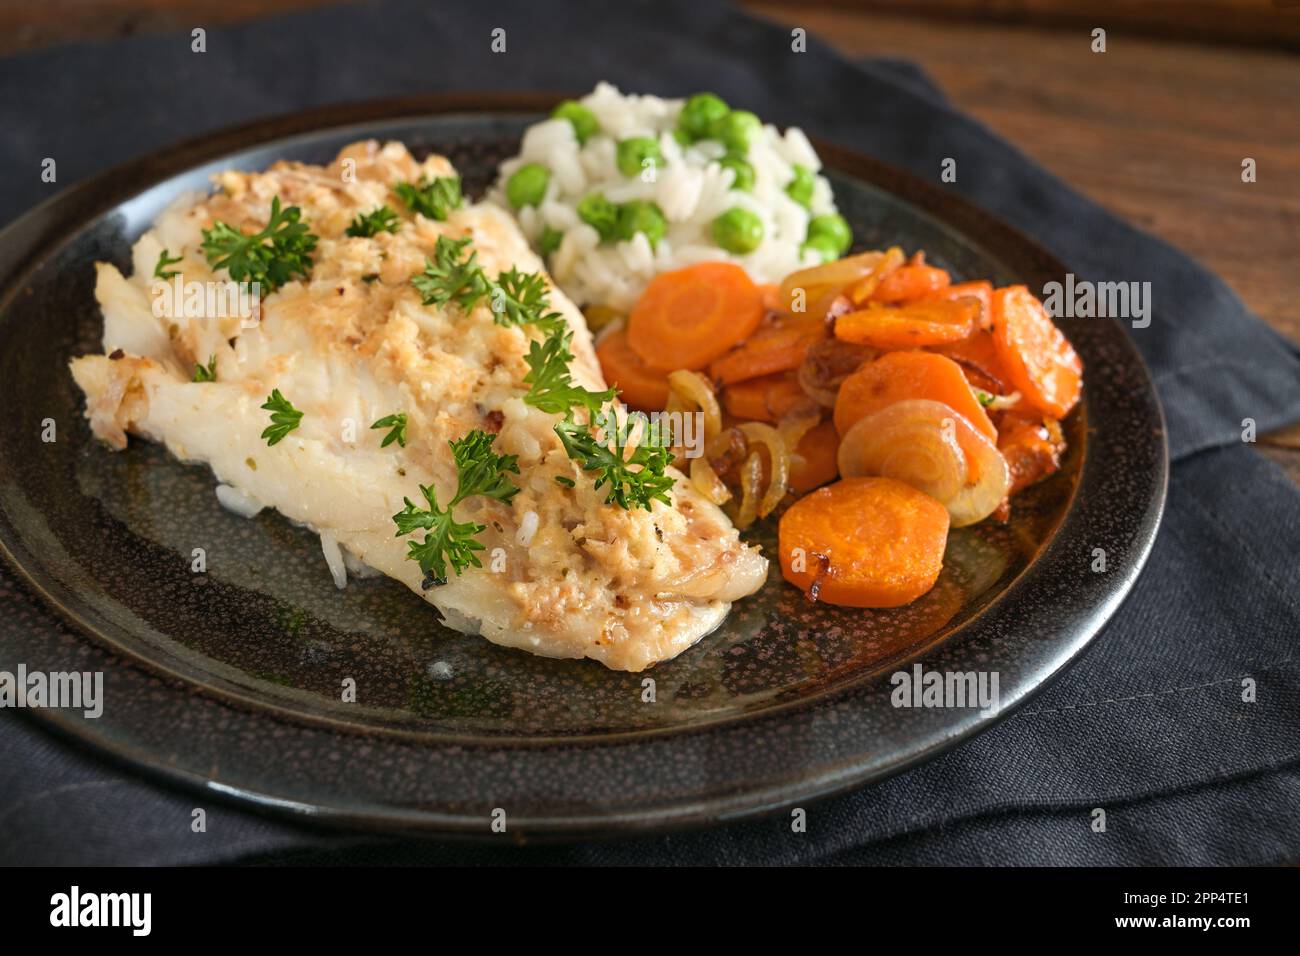 Cod fillet with parsley garnish, carrots and green pea rice on a dark plate, healthy fish meal, selected focus, very narrow depth of field Stock Photo